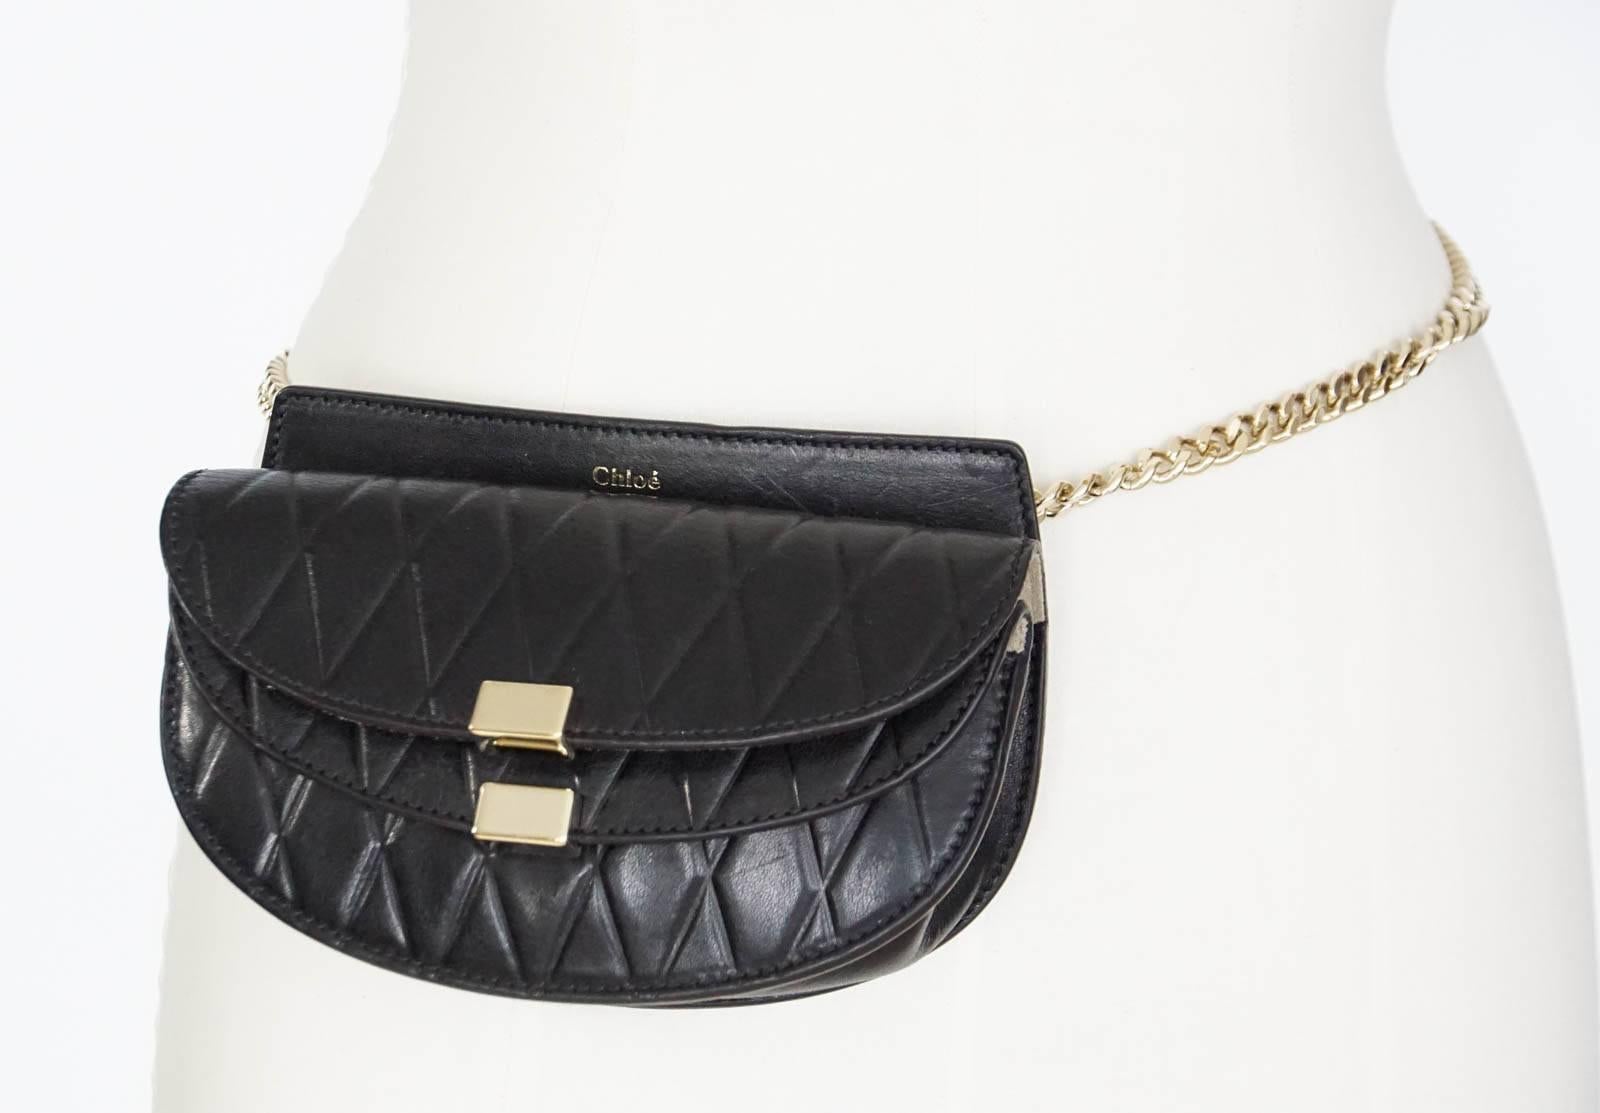 Guaranteed authentic CHLOE Black Georgia convertible demilune shaped bag with diamond pattern pressed into the leather. 
Gold toned adjustable chain strap adding versatility as shoulder/crossbody/waist bag.
Double front flap with magnetic closure